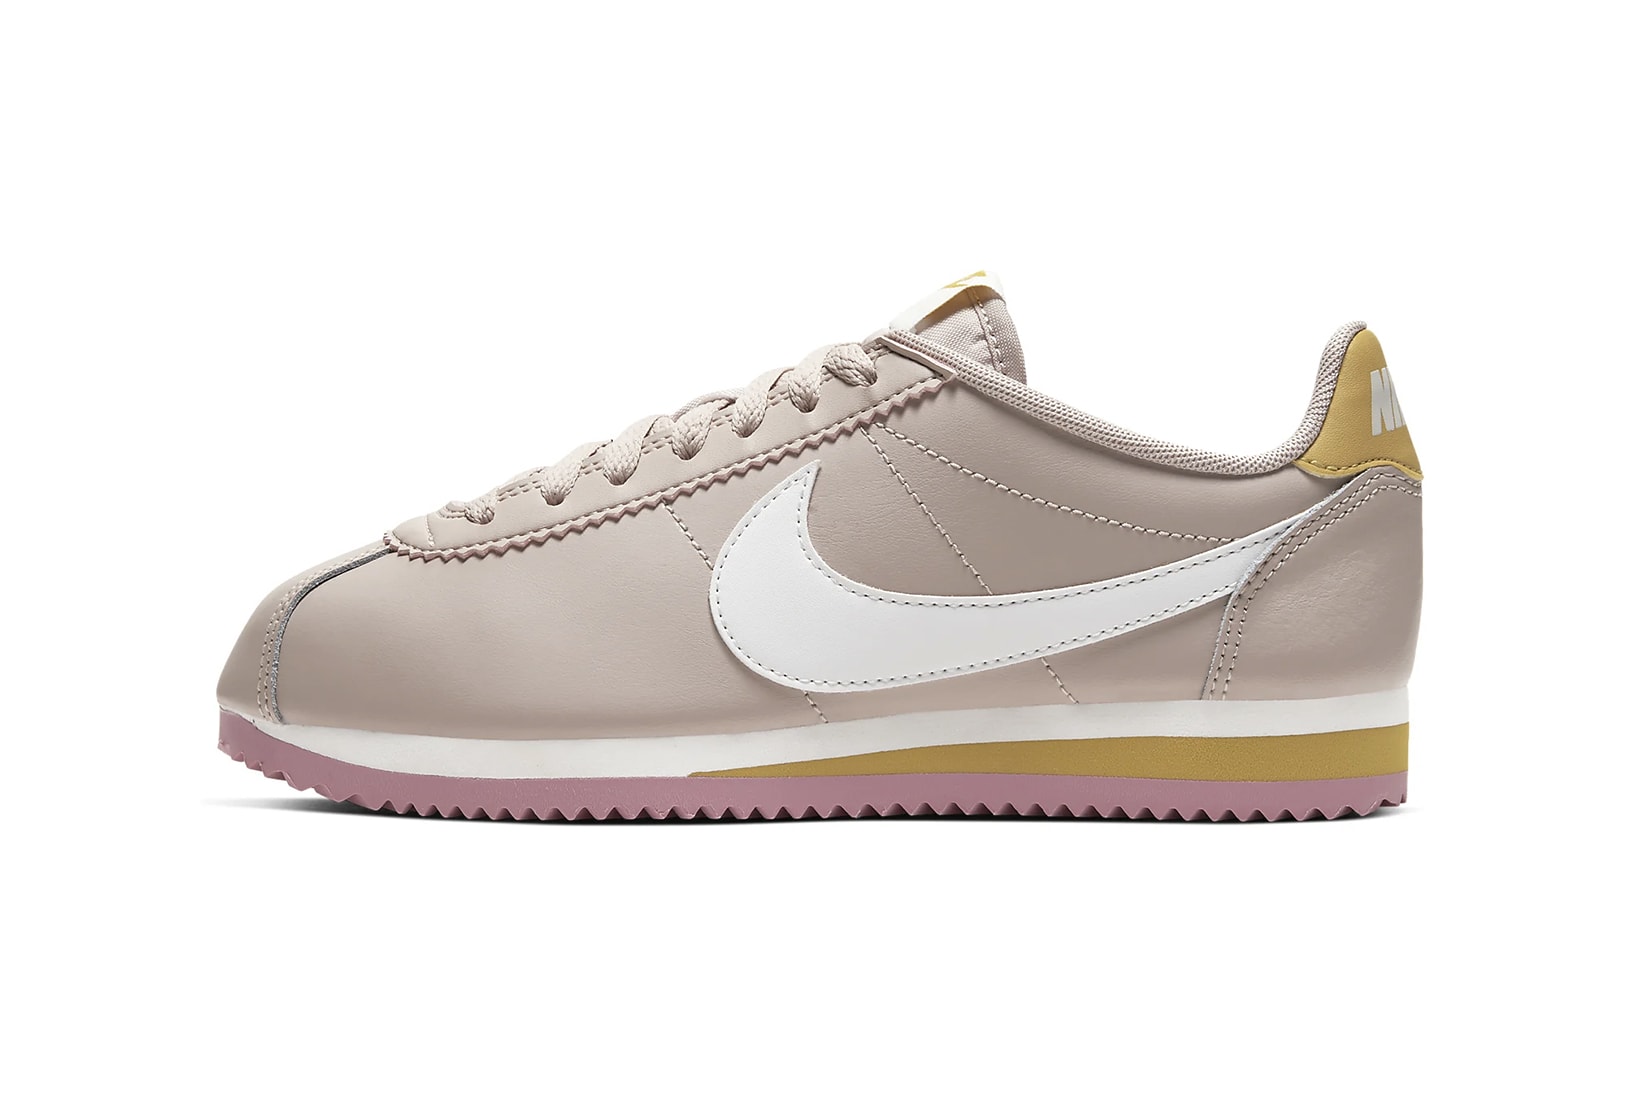 nike classic cortez womens sneakers muted pink white shoes footwear sneakerhead